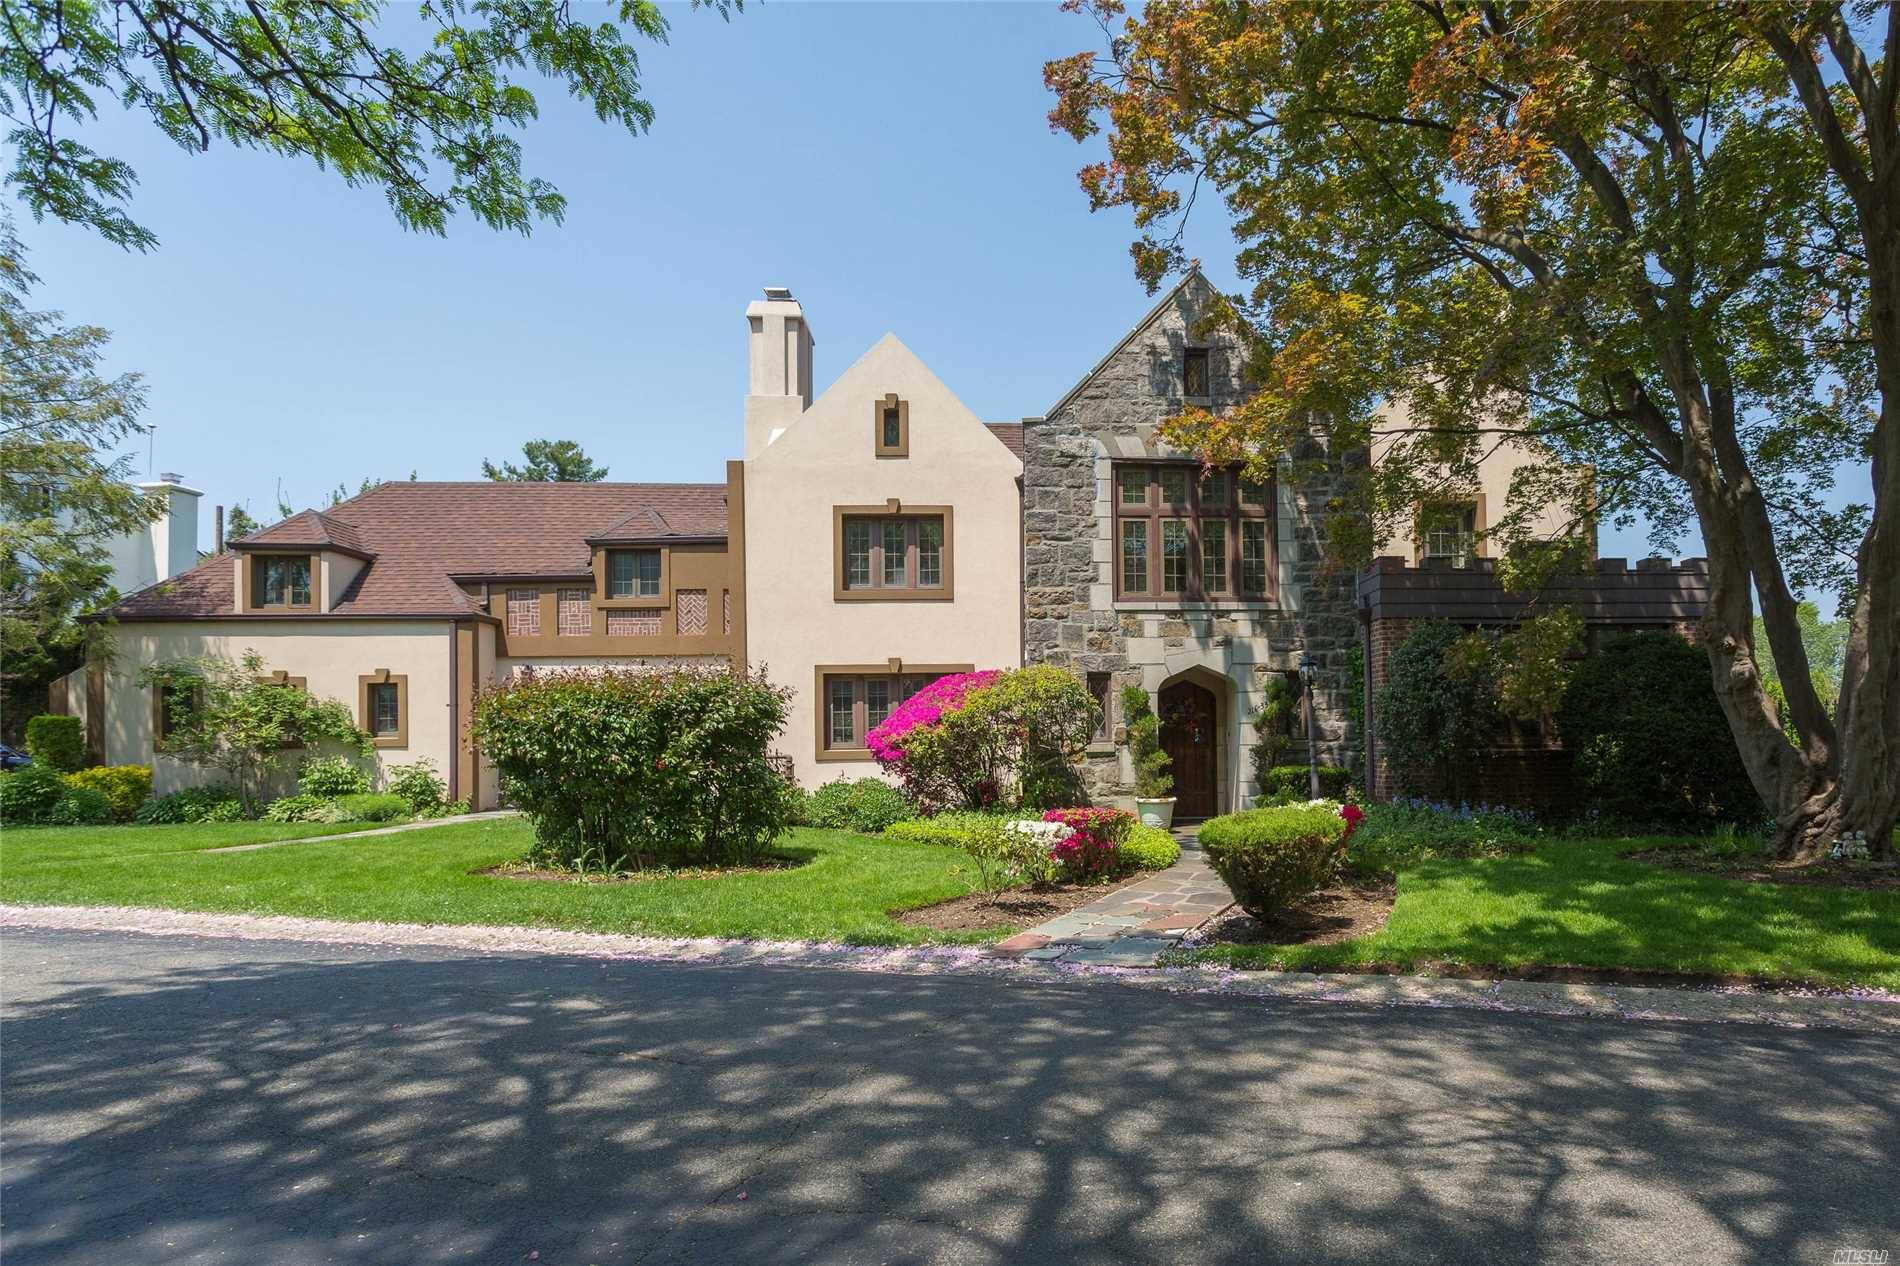 Magnificent Tudor On Over-Sized Lot Tucked Into The Enclave Of Bayside Gables.